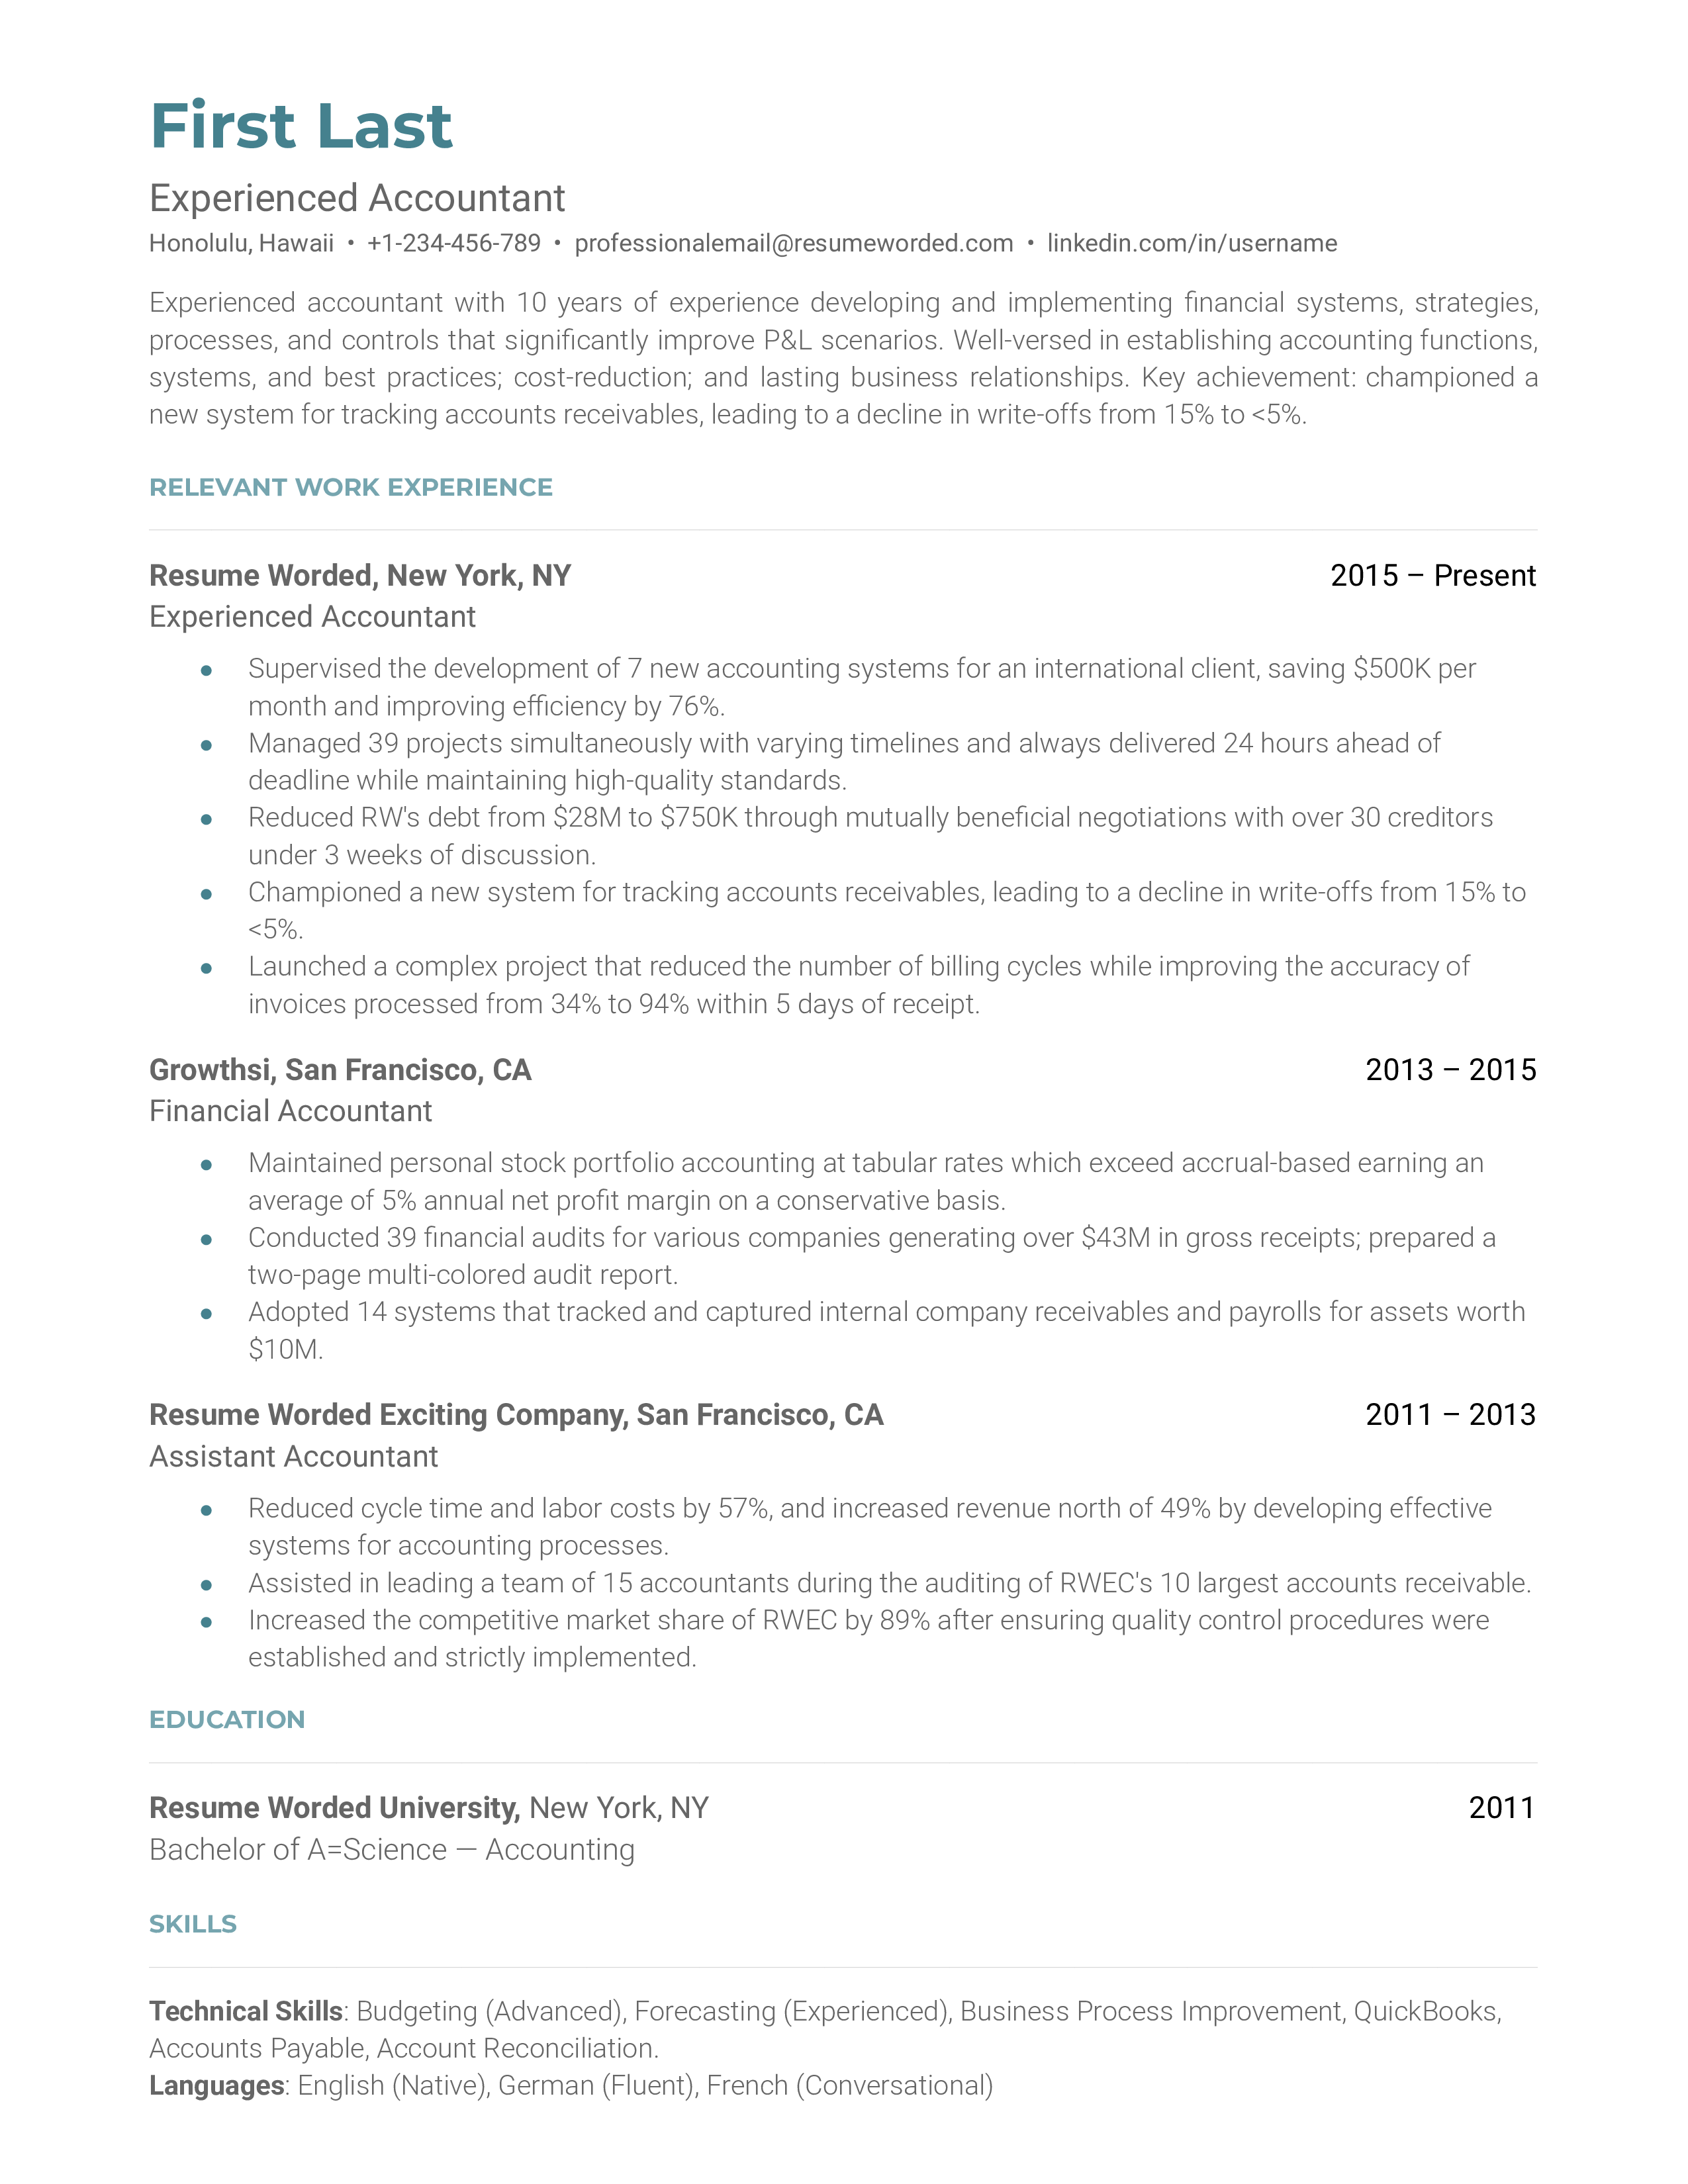 Experienced accountant's CV emphasizing tech skills and financial analysis.